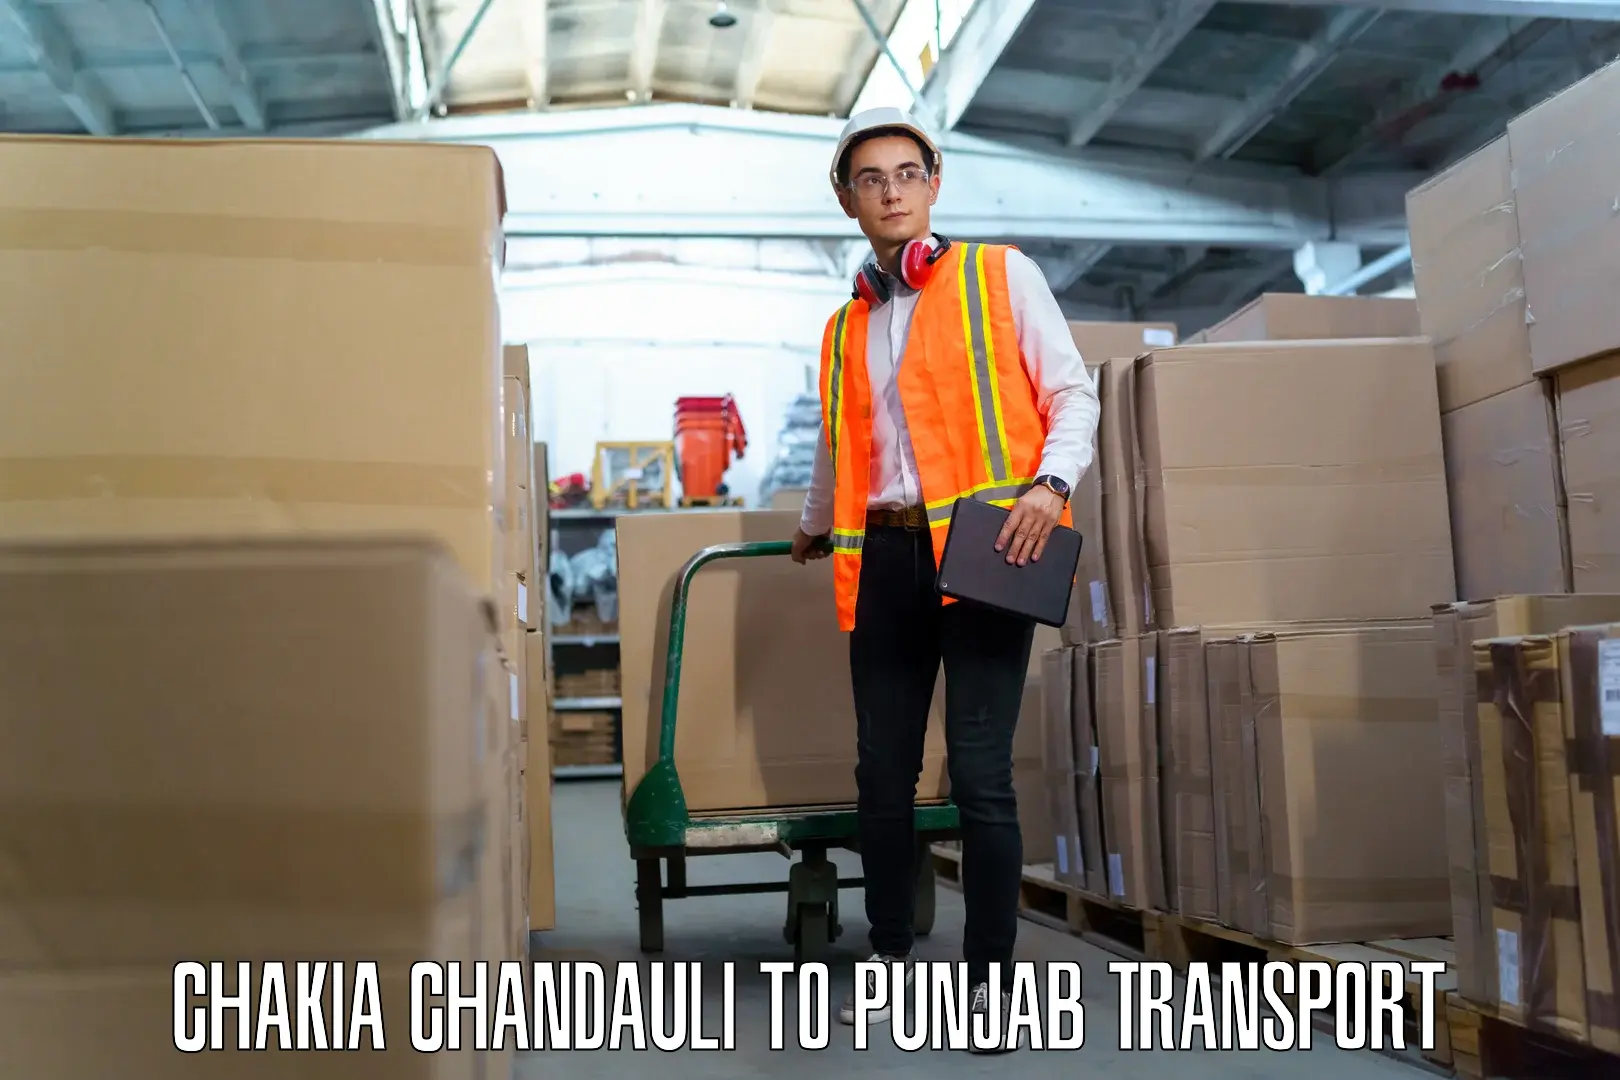 Part load transport service in India Chakia Chandauli to Mohali